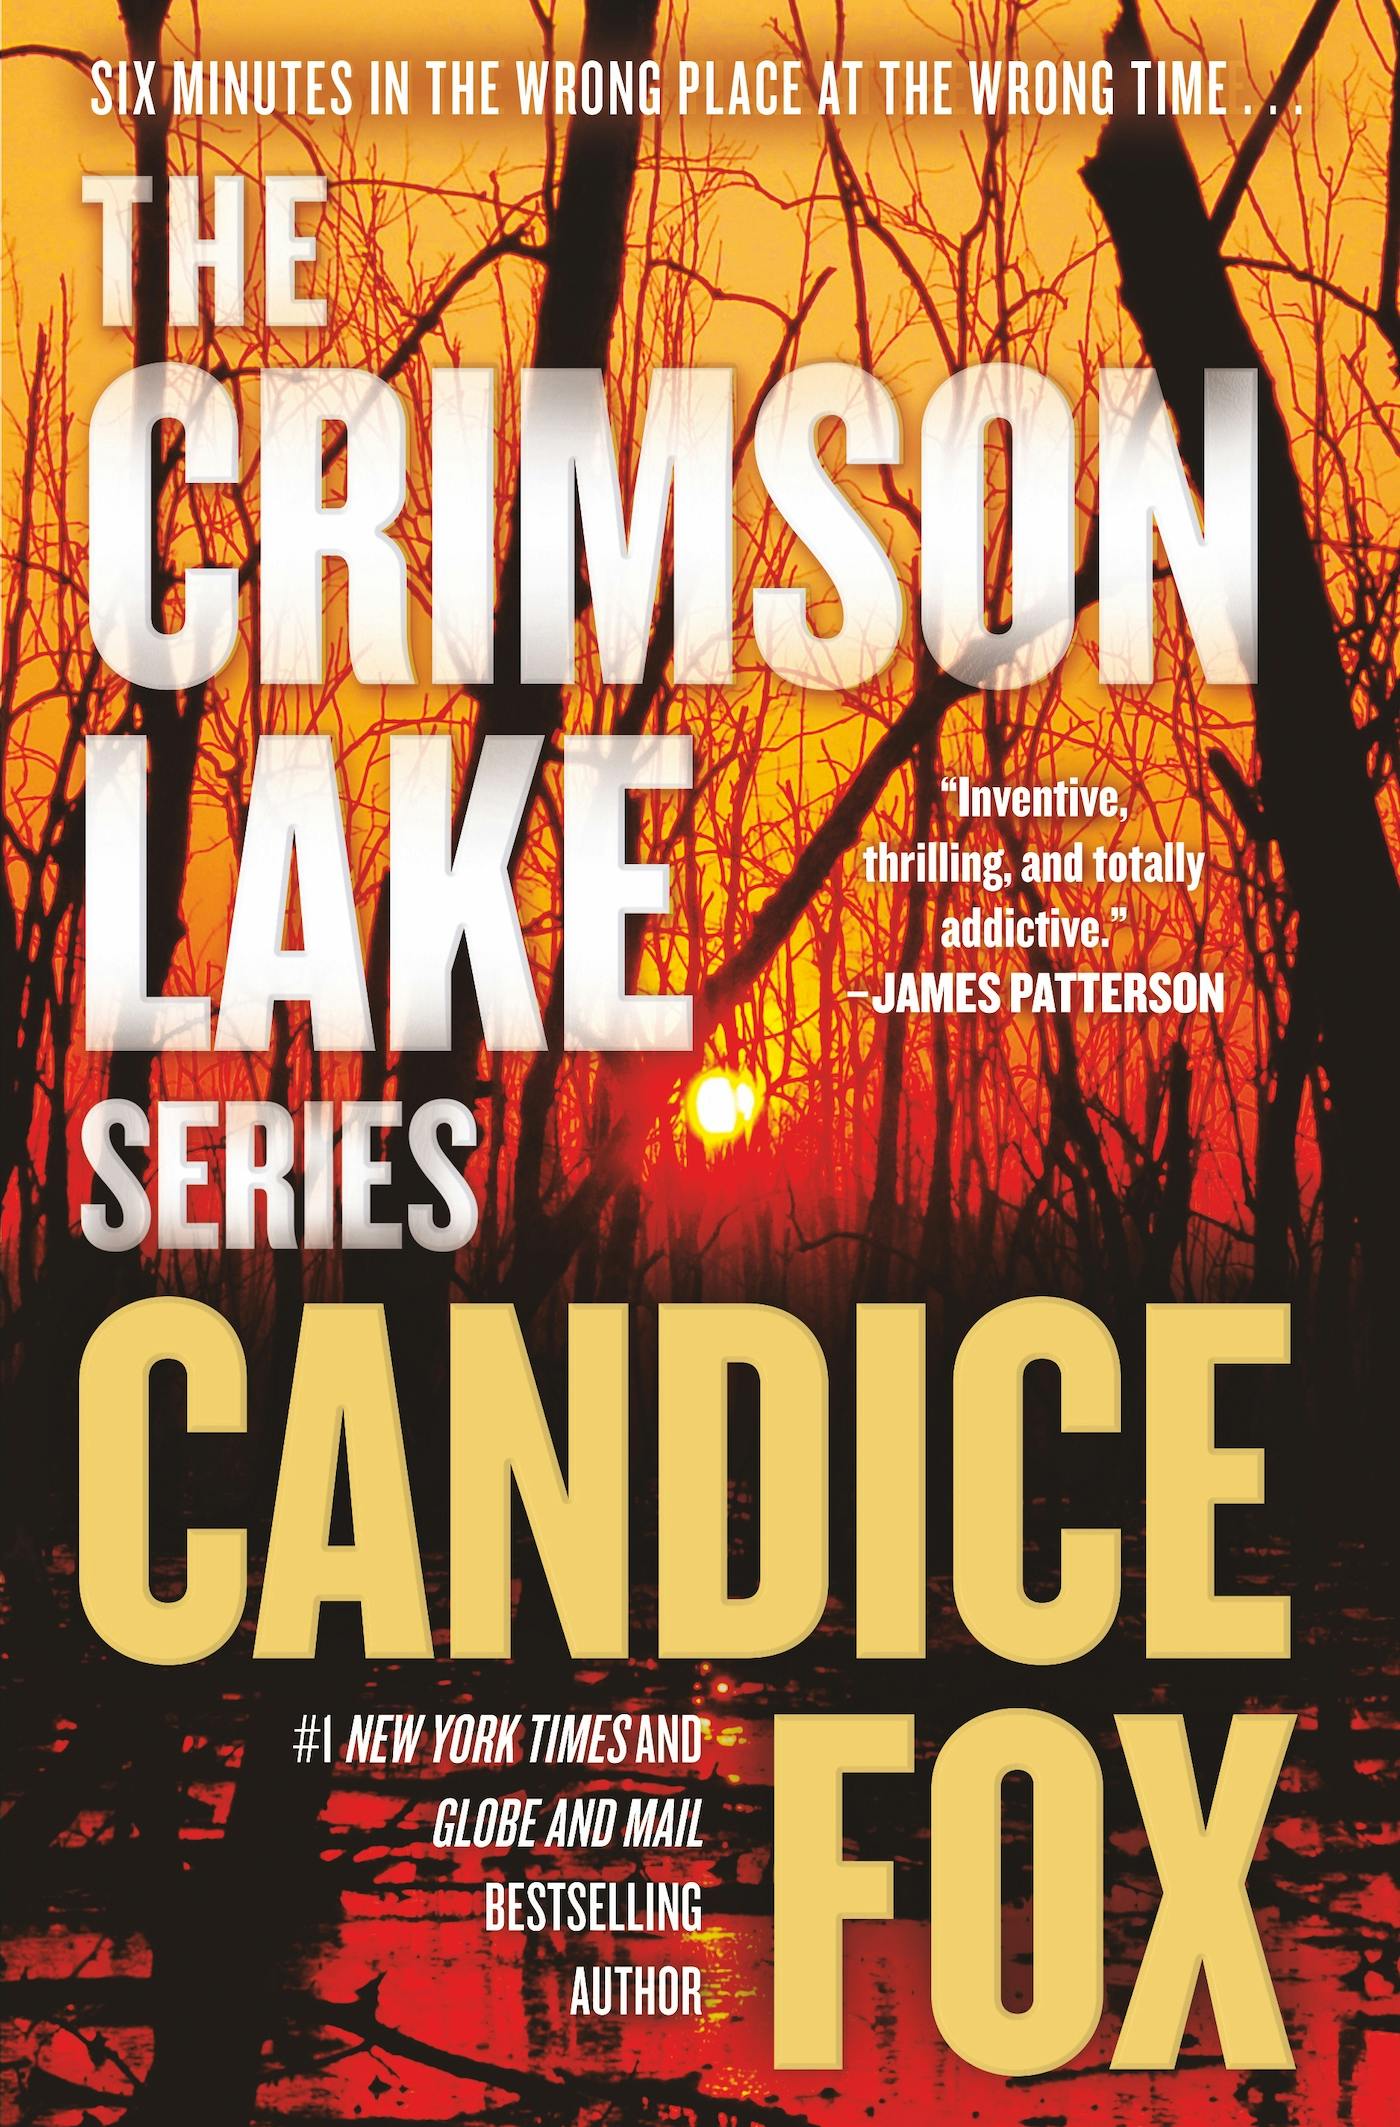 Cover for the book titled as: The Crimson Lake Series